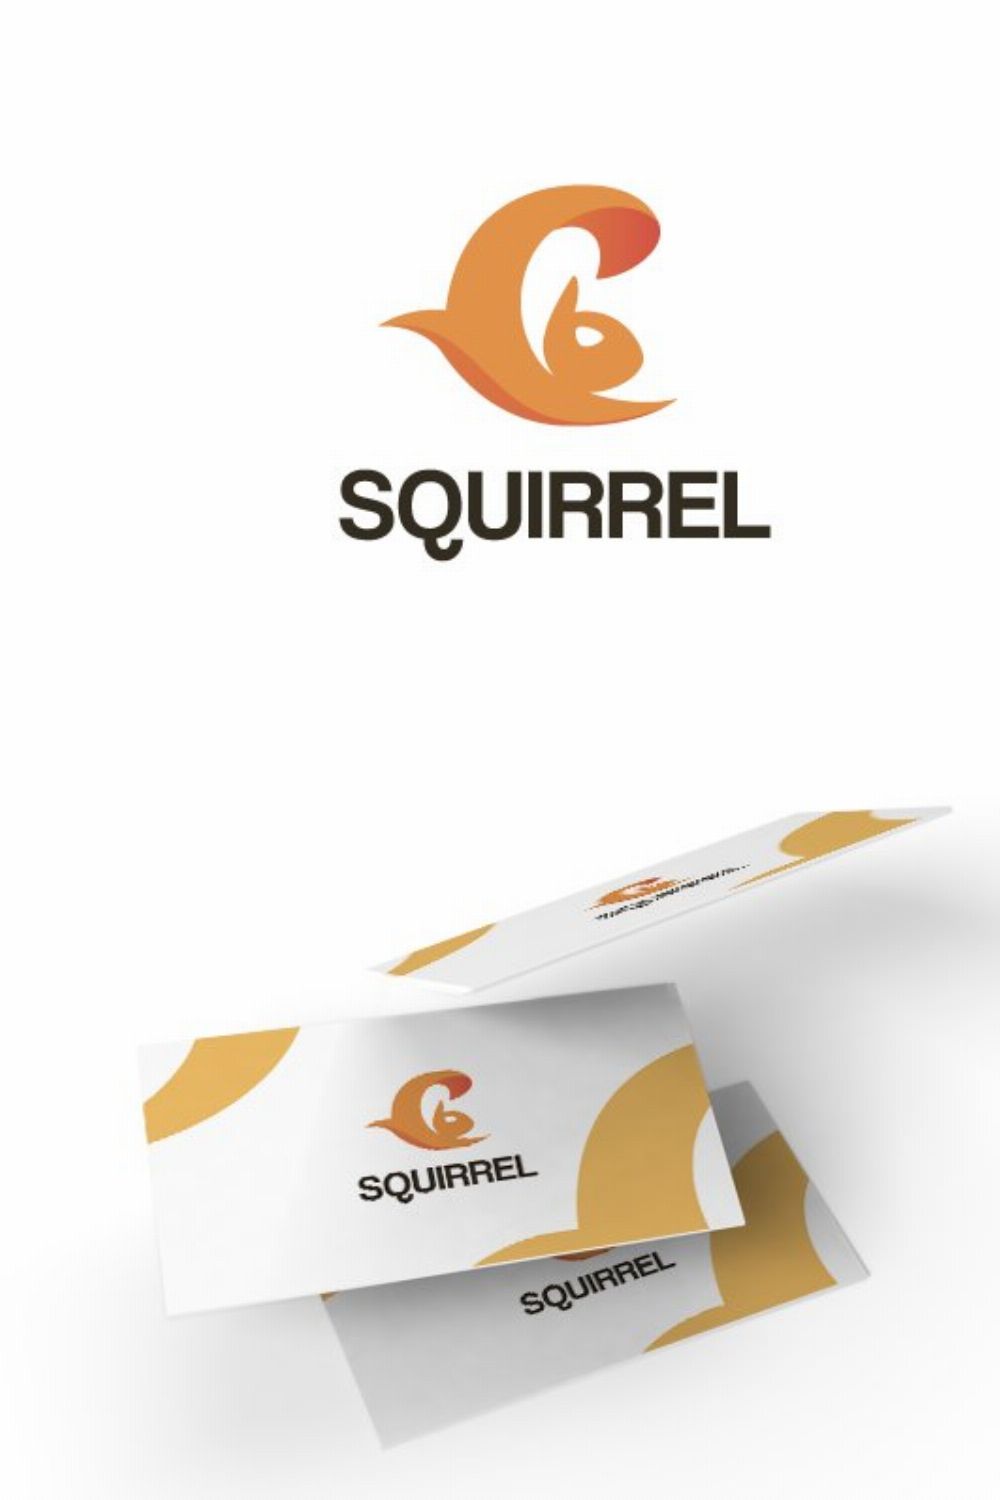 Squirrel logo pinterest preview image.